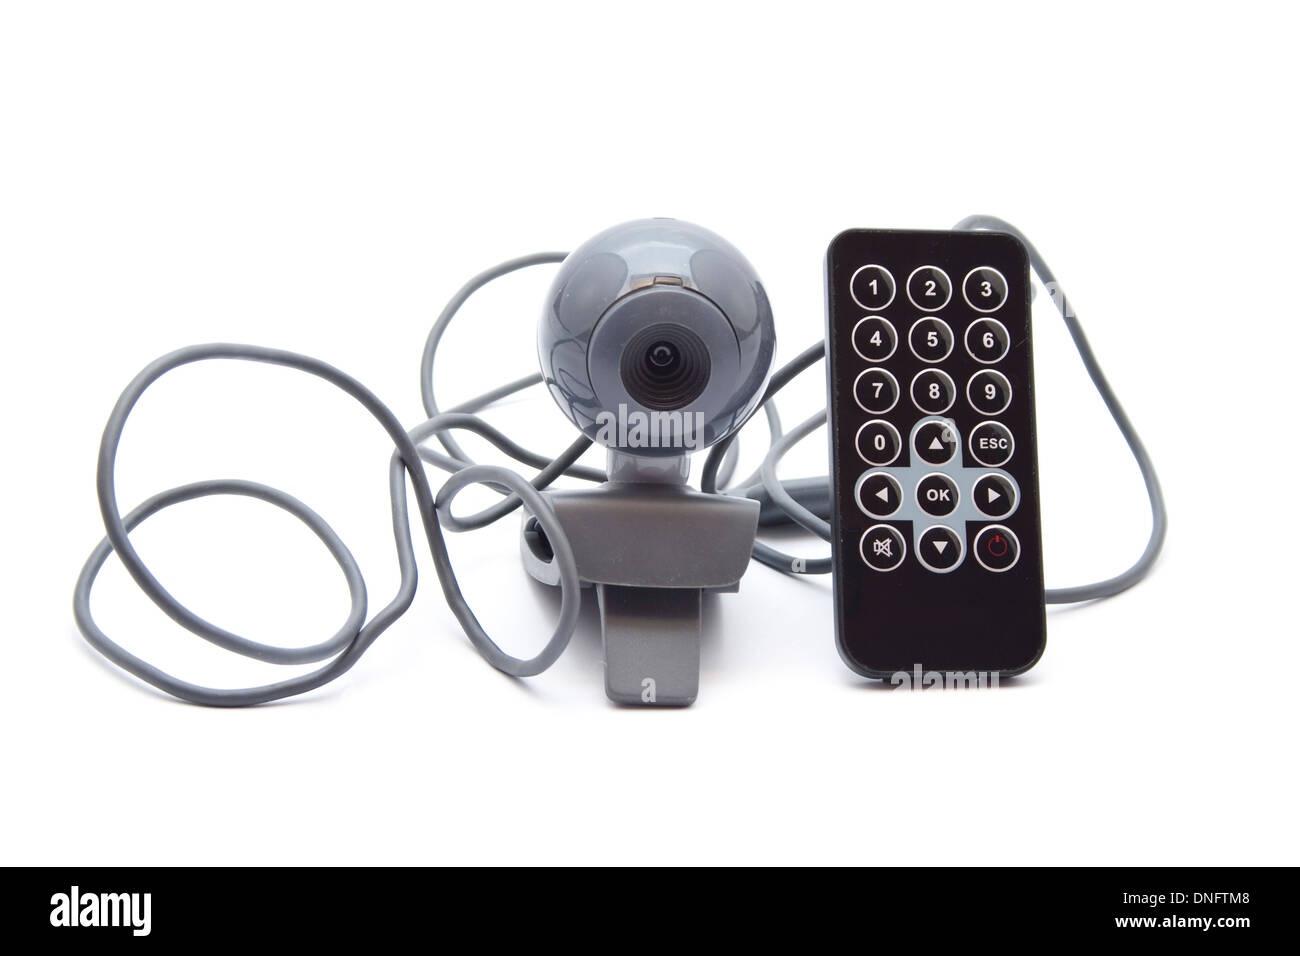 Webcam with Cable and Remote Control Stock Photo